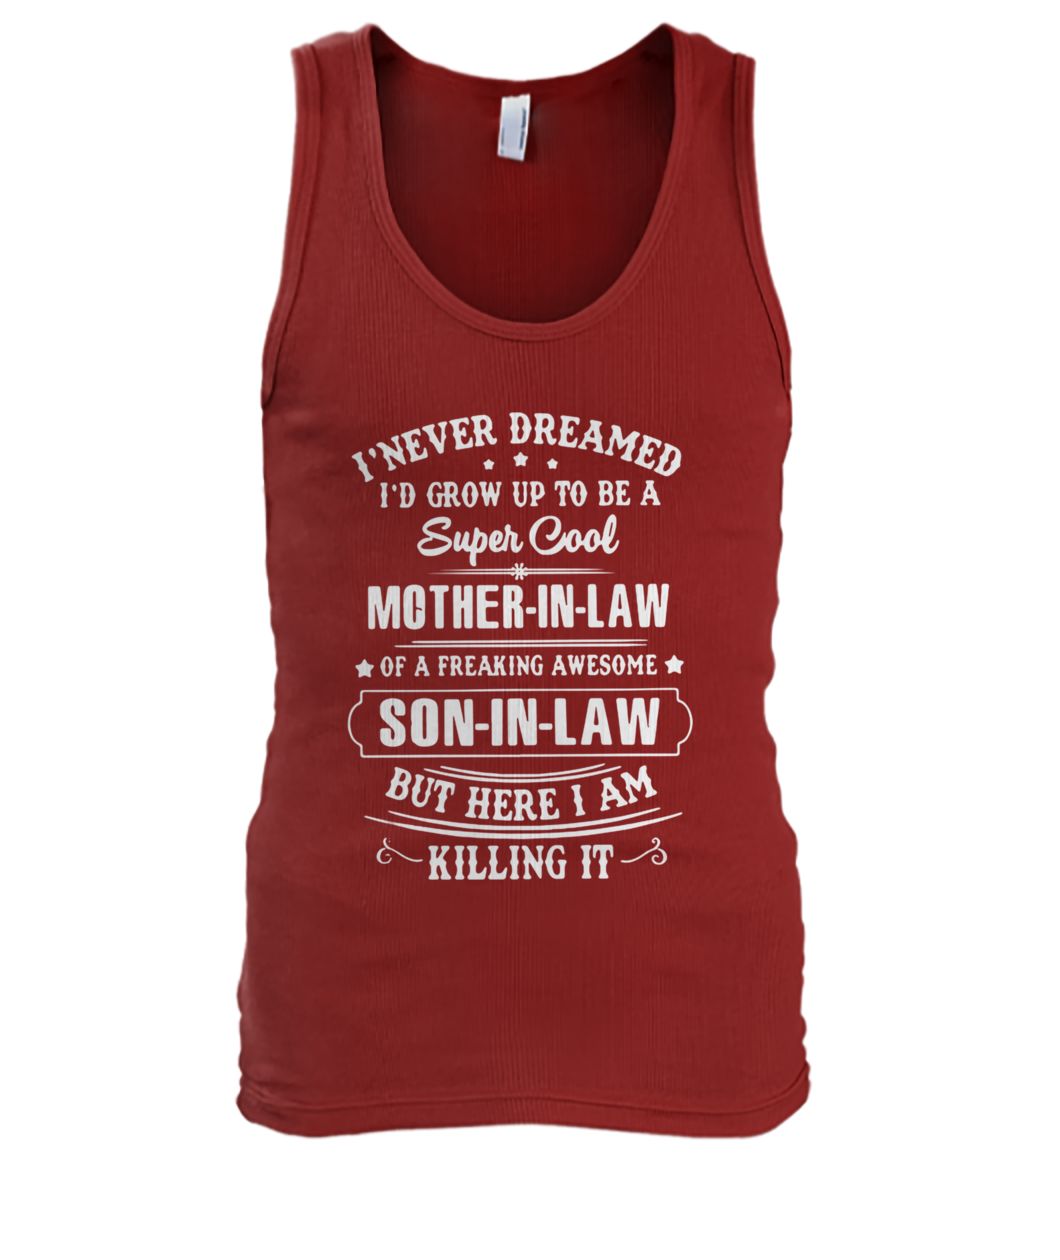 I never dreamed I'd grow up to be a super cool mother-in-law of a freaking awesome men's tank top